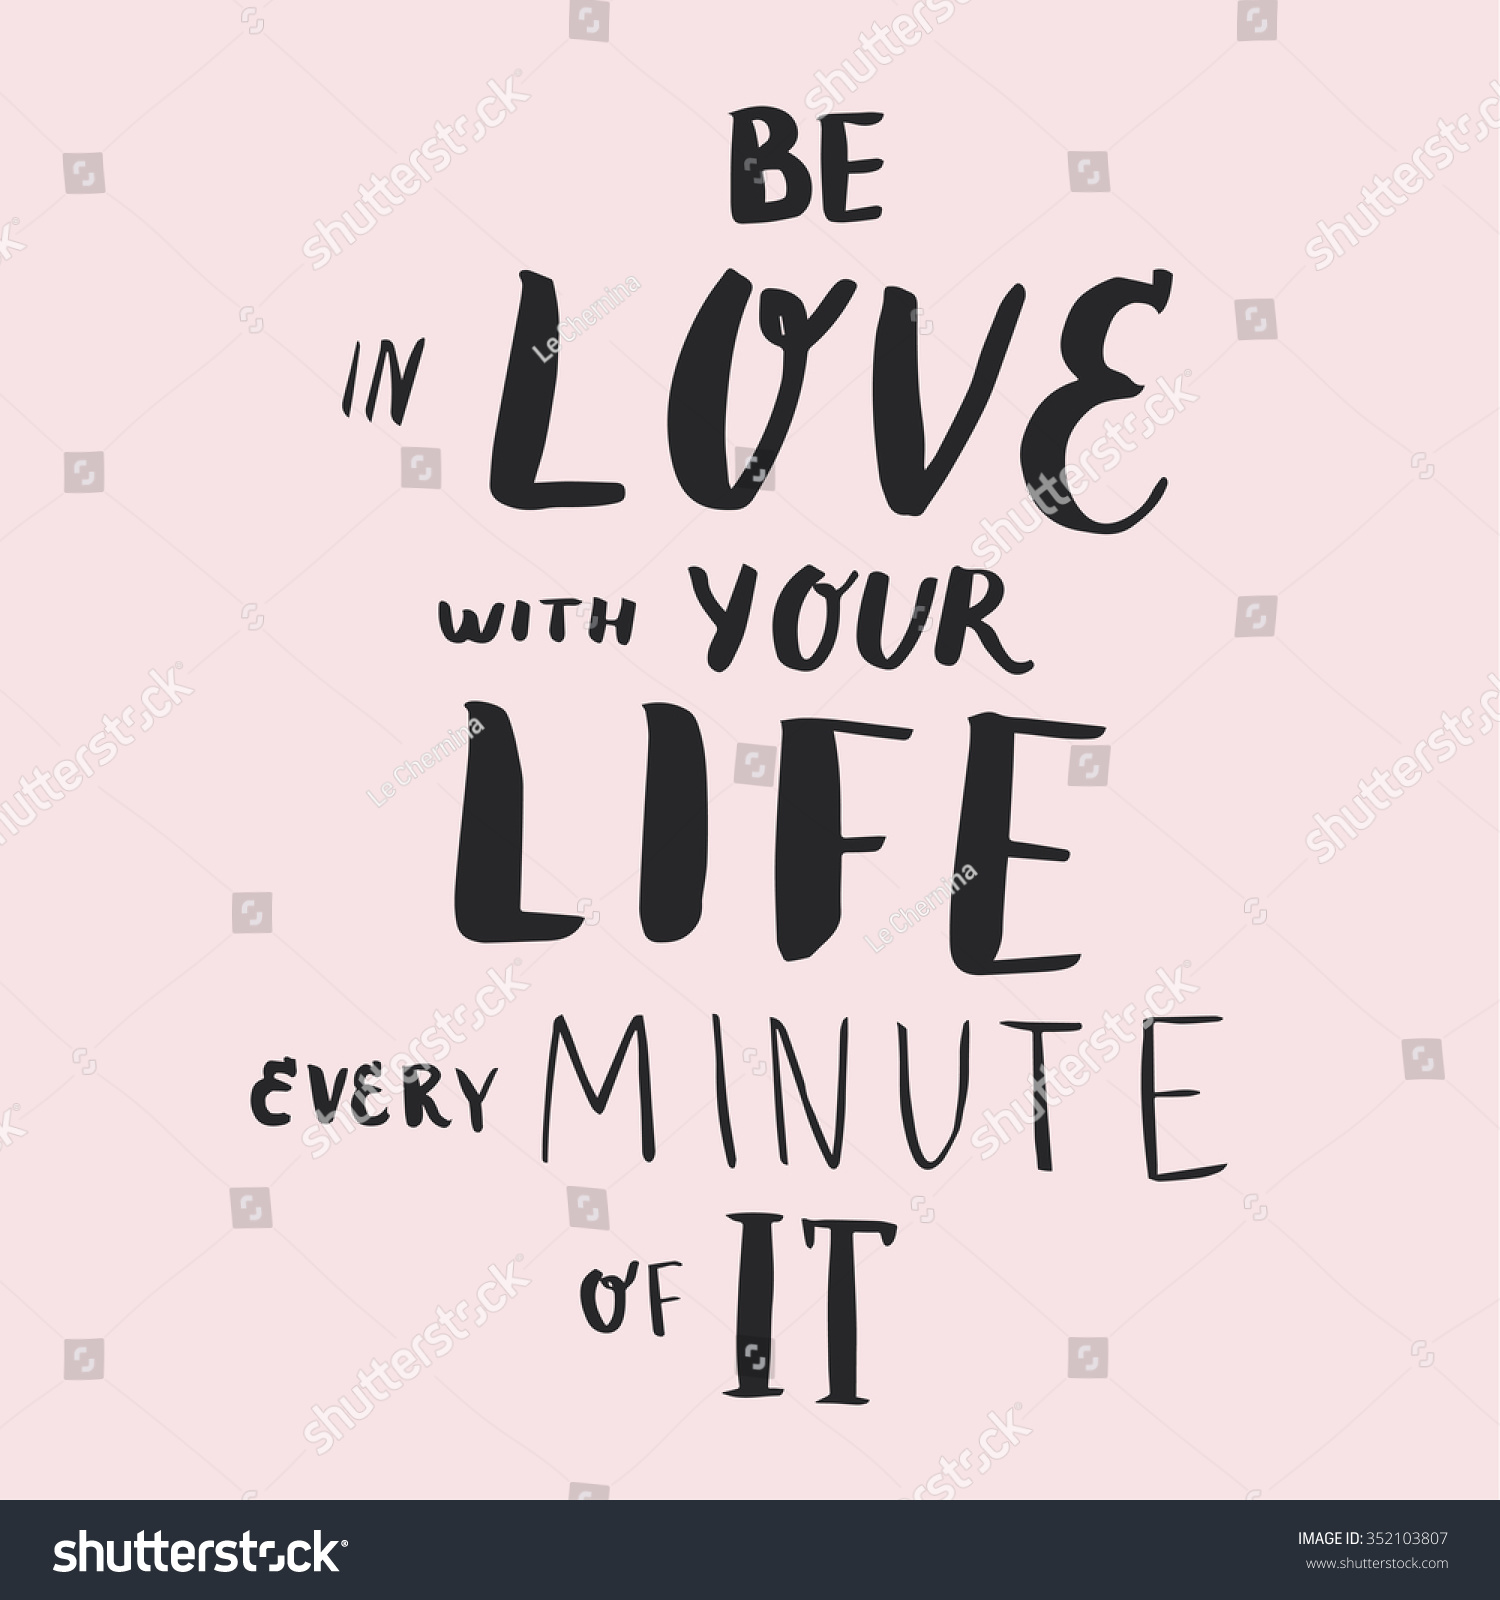 Be in love with your life every minute of It Hand drawn poster with a